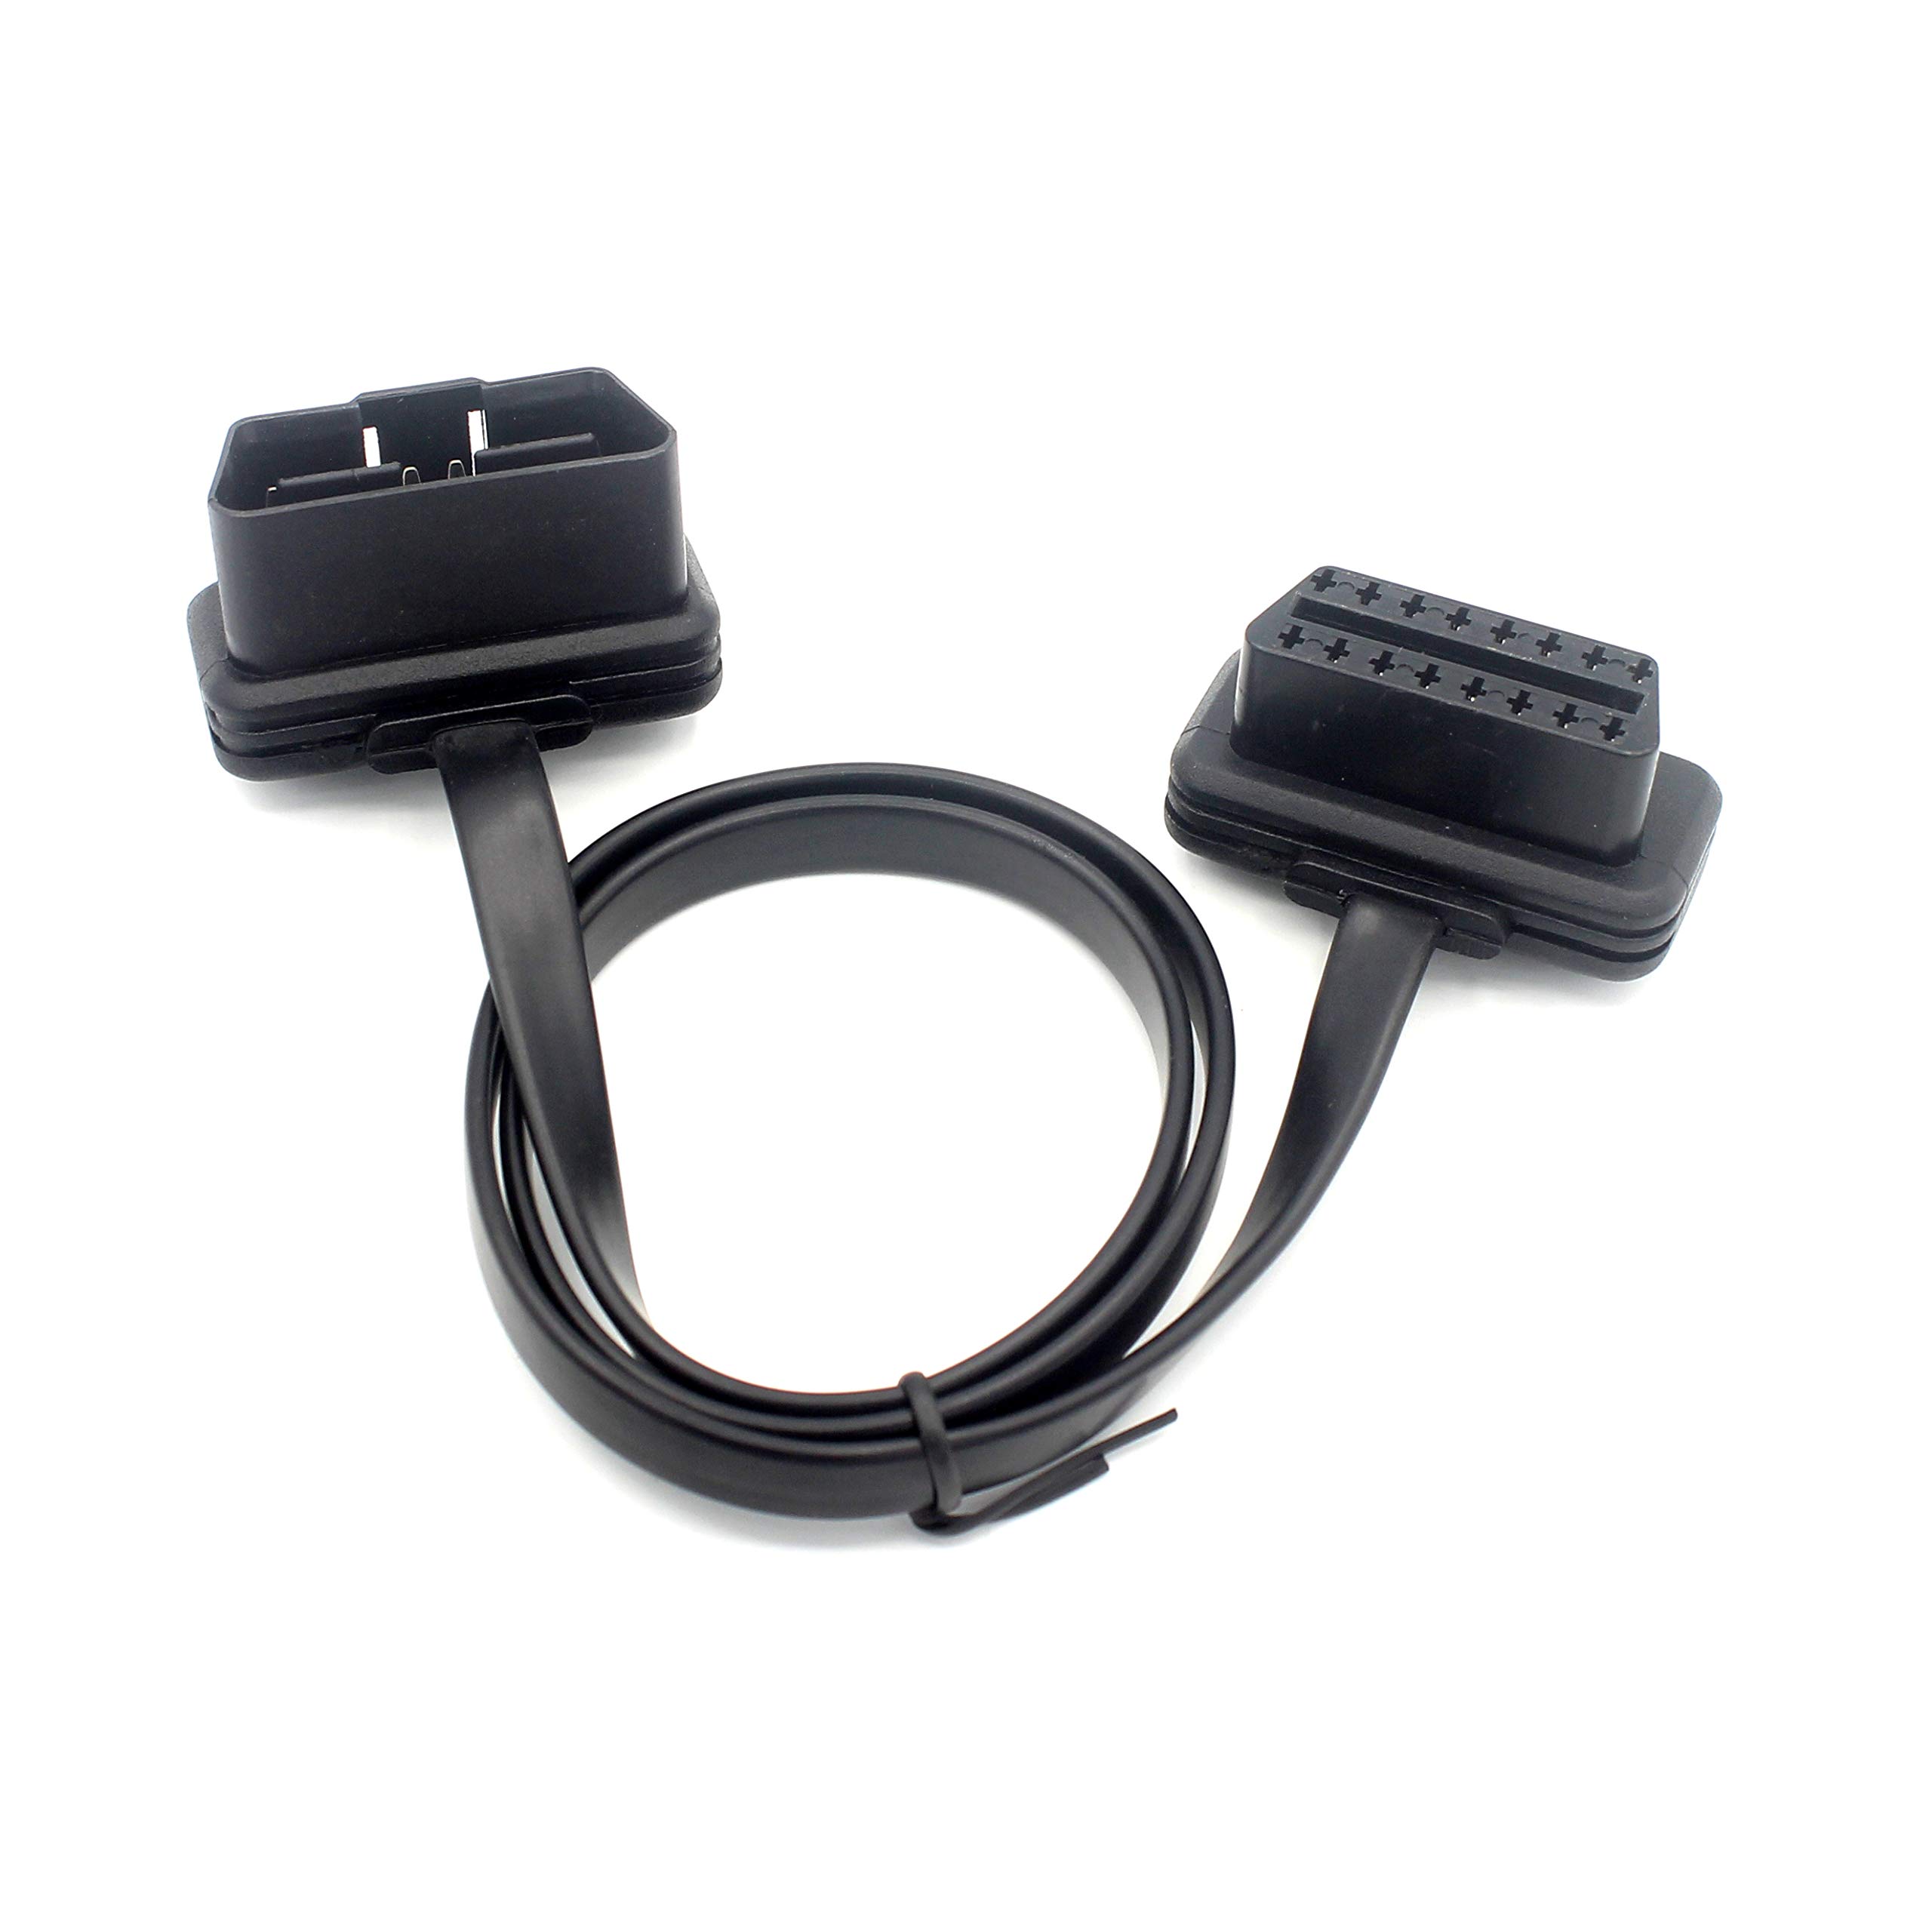 Lalomo Flat Noodle OBD2 Cable, Low Profile Male to Female 8 Pin Pass Through OBDII Extension Cable for Diagnostic Tools, Bluetooth Code Reader 0.6m/2 feet